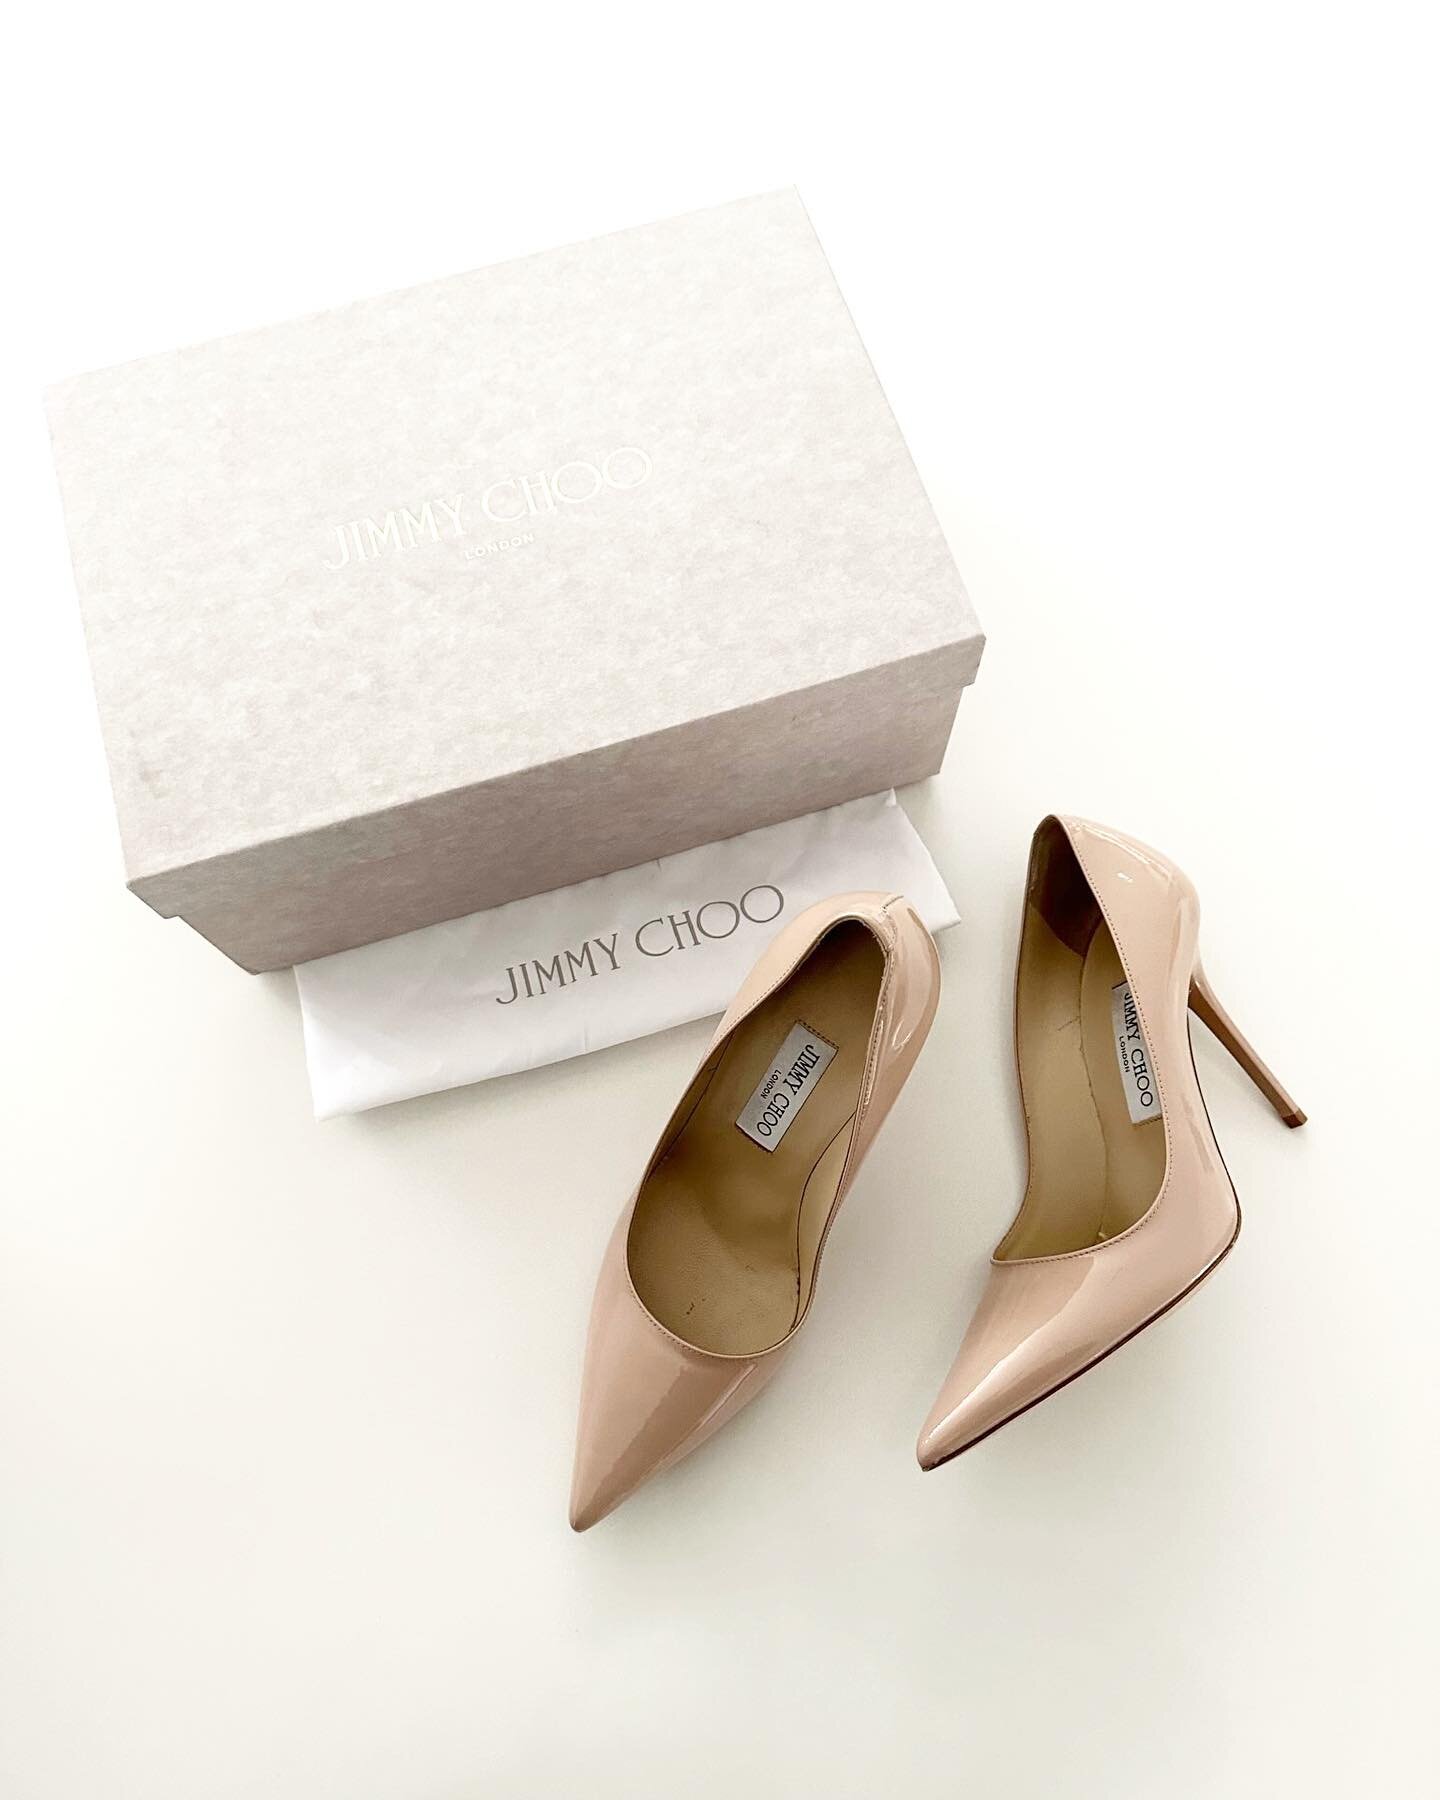 Light pink Abel heels size 37 in like new condition with box and dust bag. These are such a beautiful neutral and in my opinion are best for a US size 7. It&rsquo;s a 4 inch heel. $295 Xo

*Nicole Cripe Style is not affiliated/associated/authorized/e